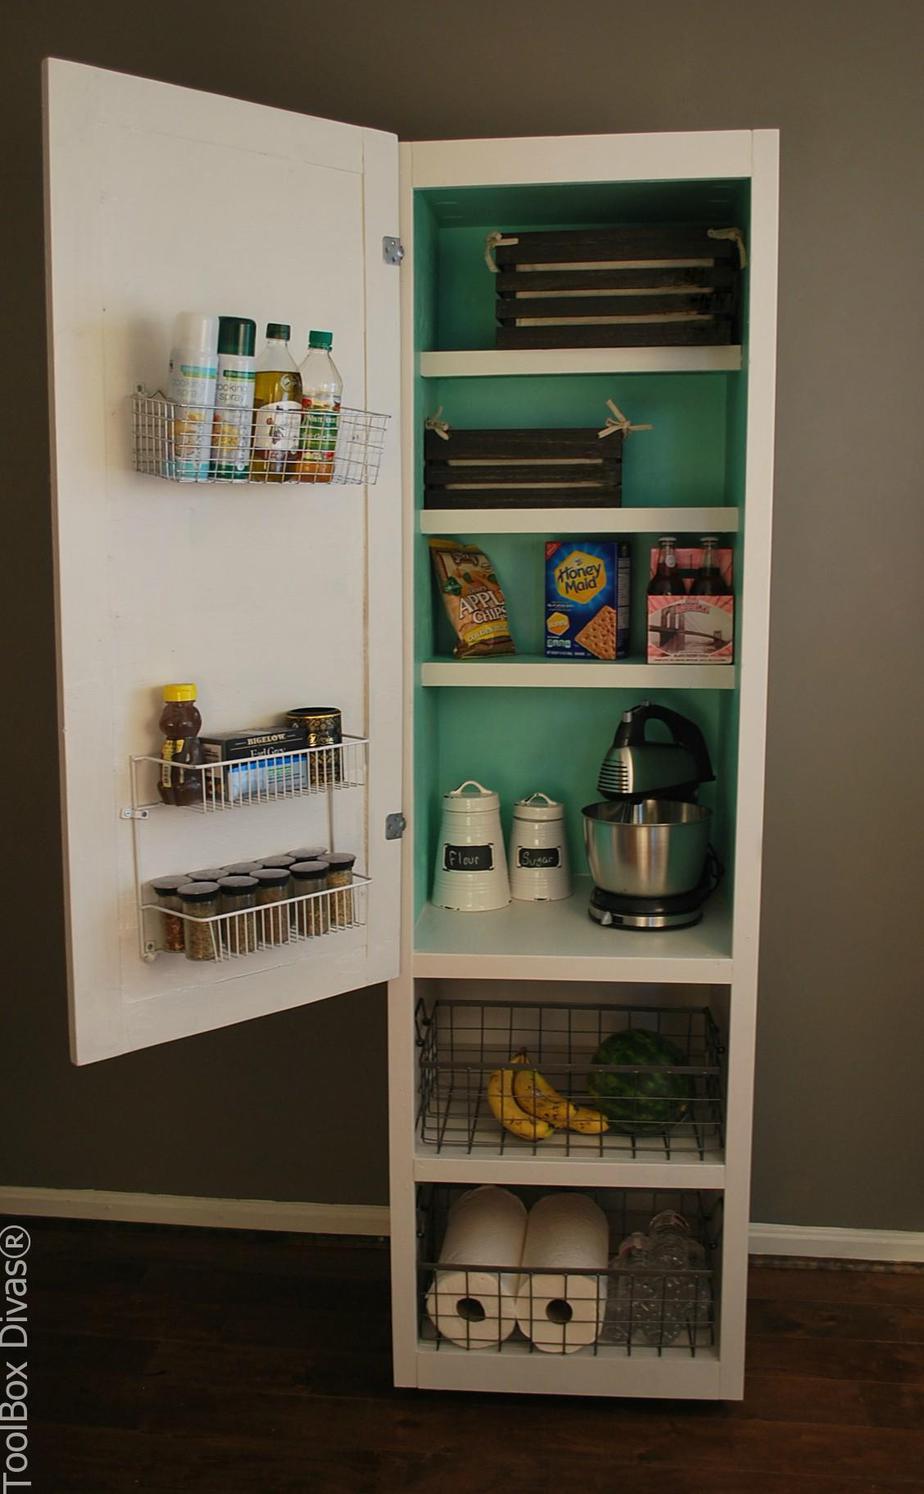 2. Build This DIY Mobile Pantry Cabinet by simphome.com